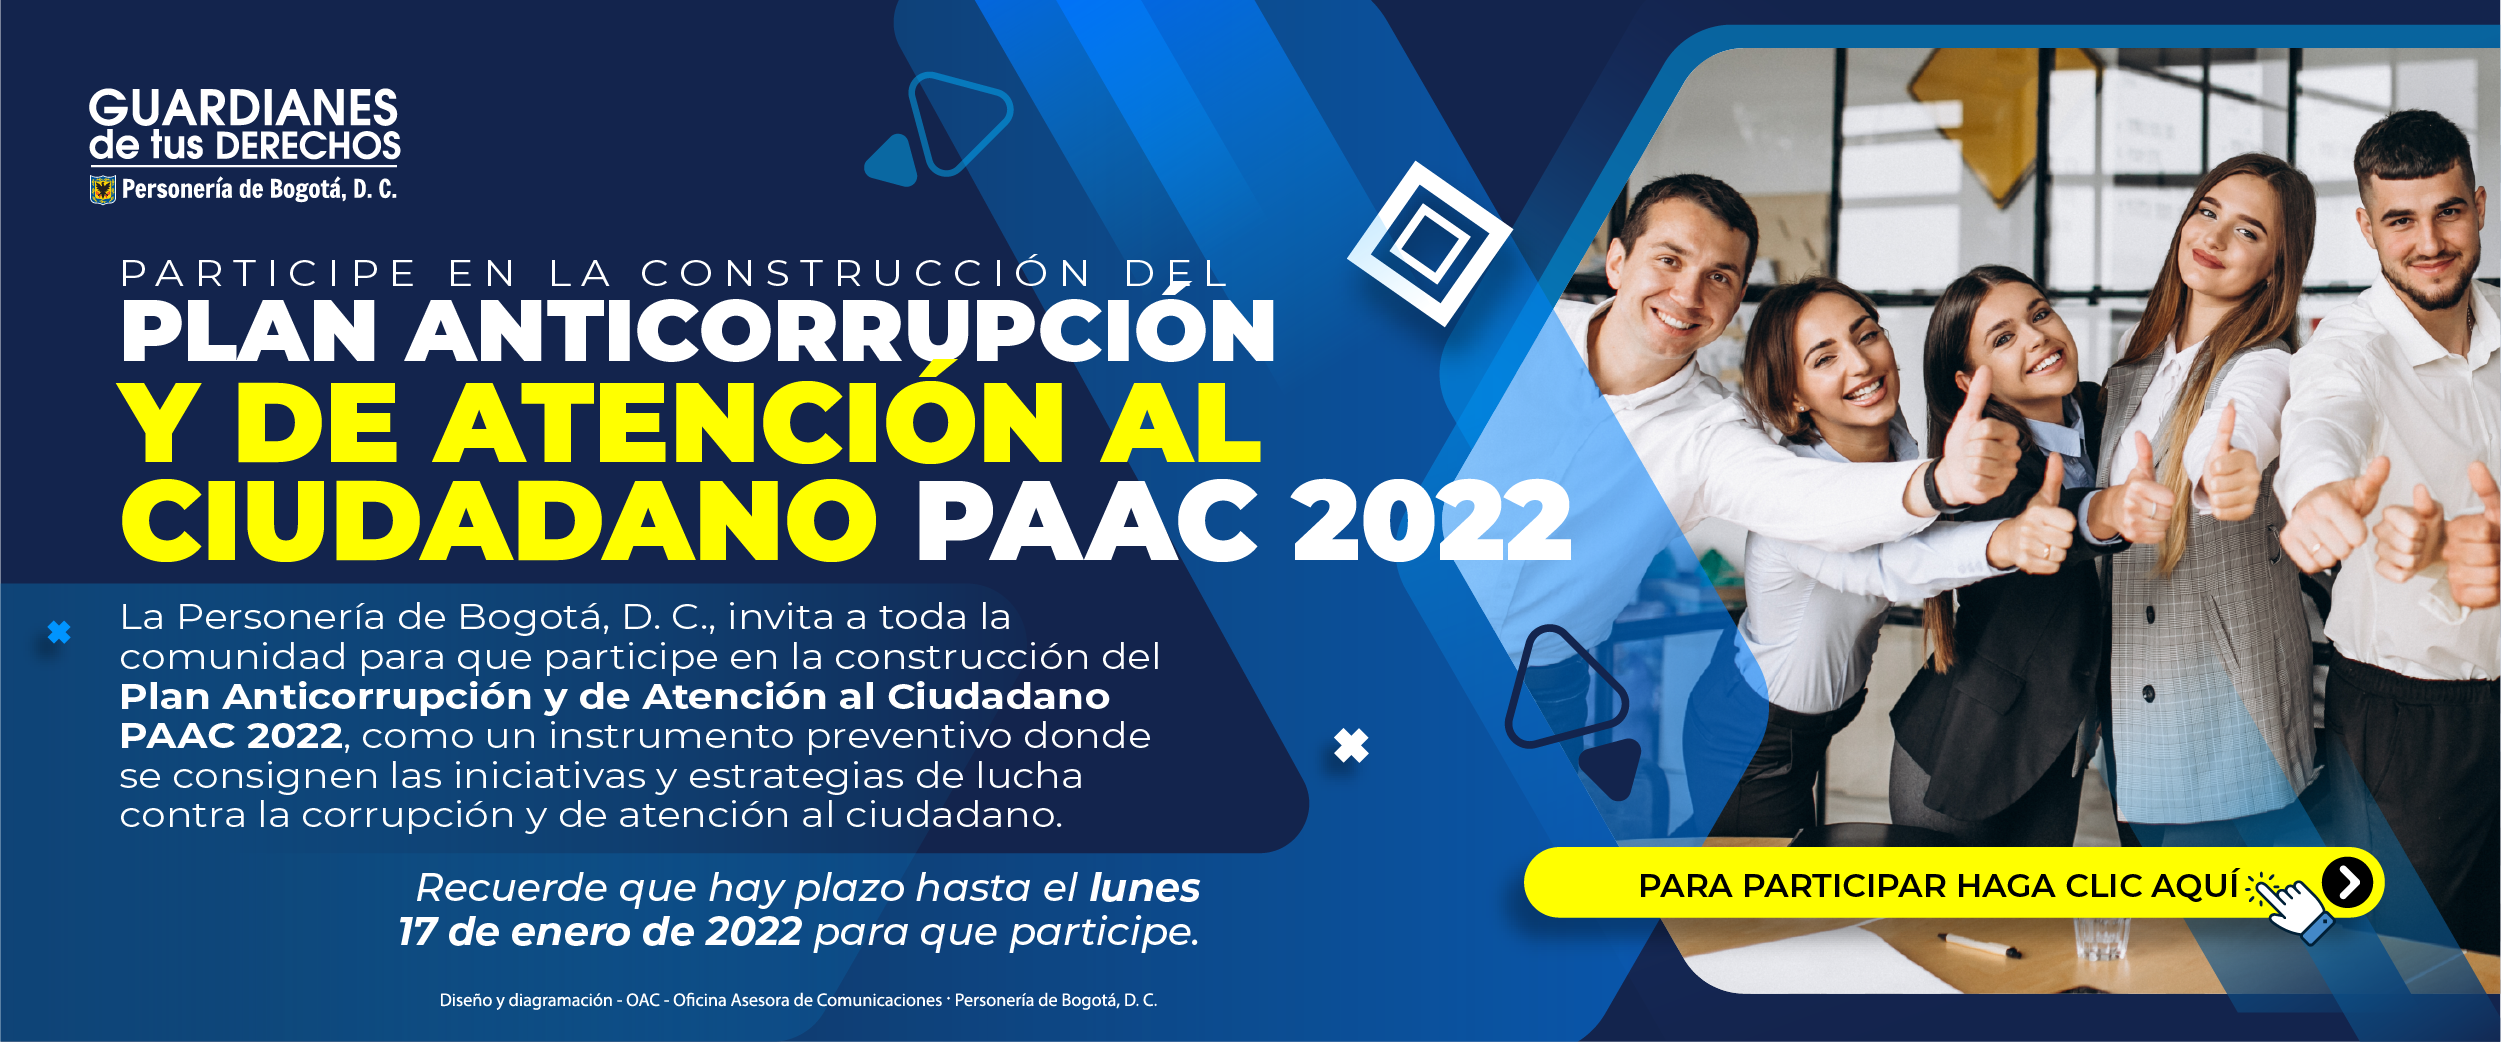 PACC_2022_-_BANNER.png - 1.50 MB